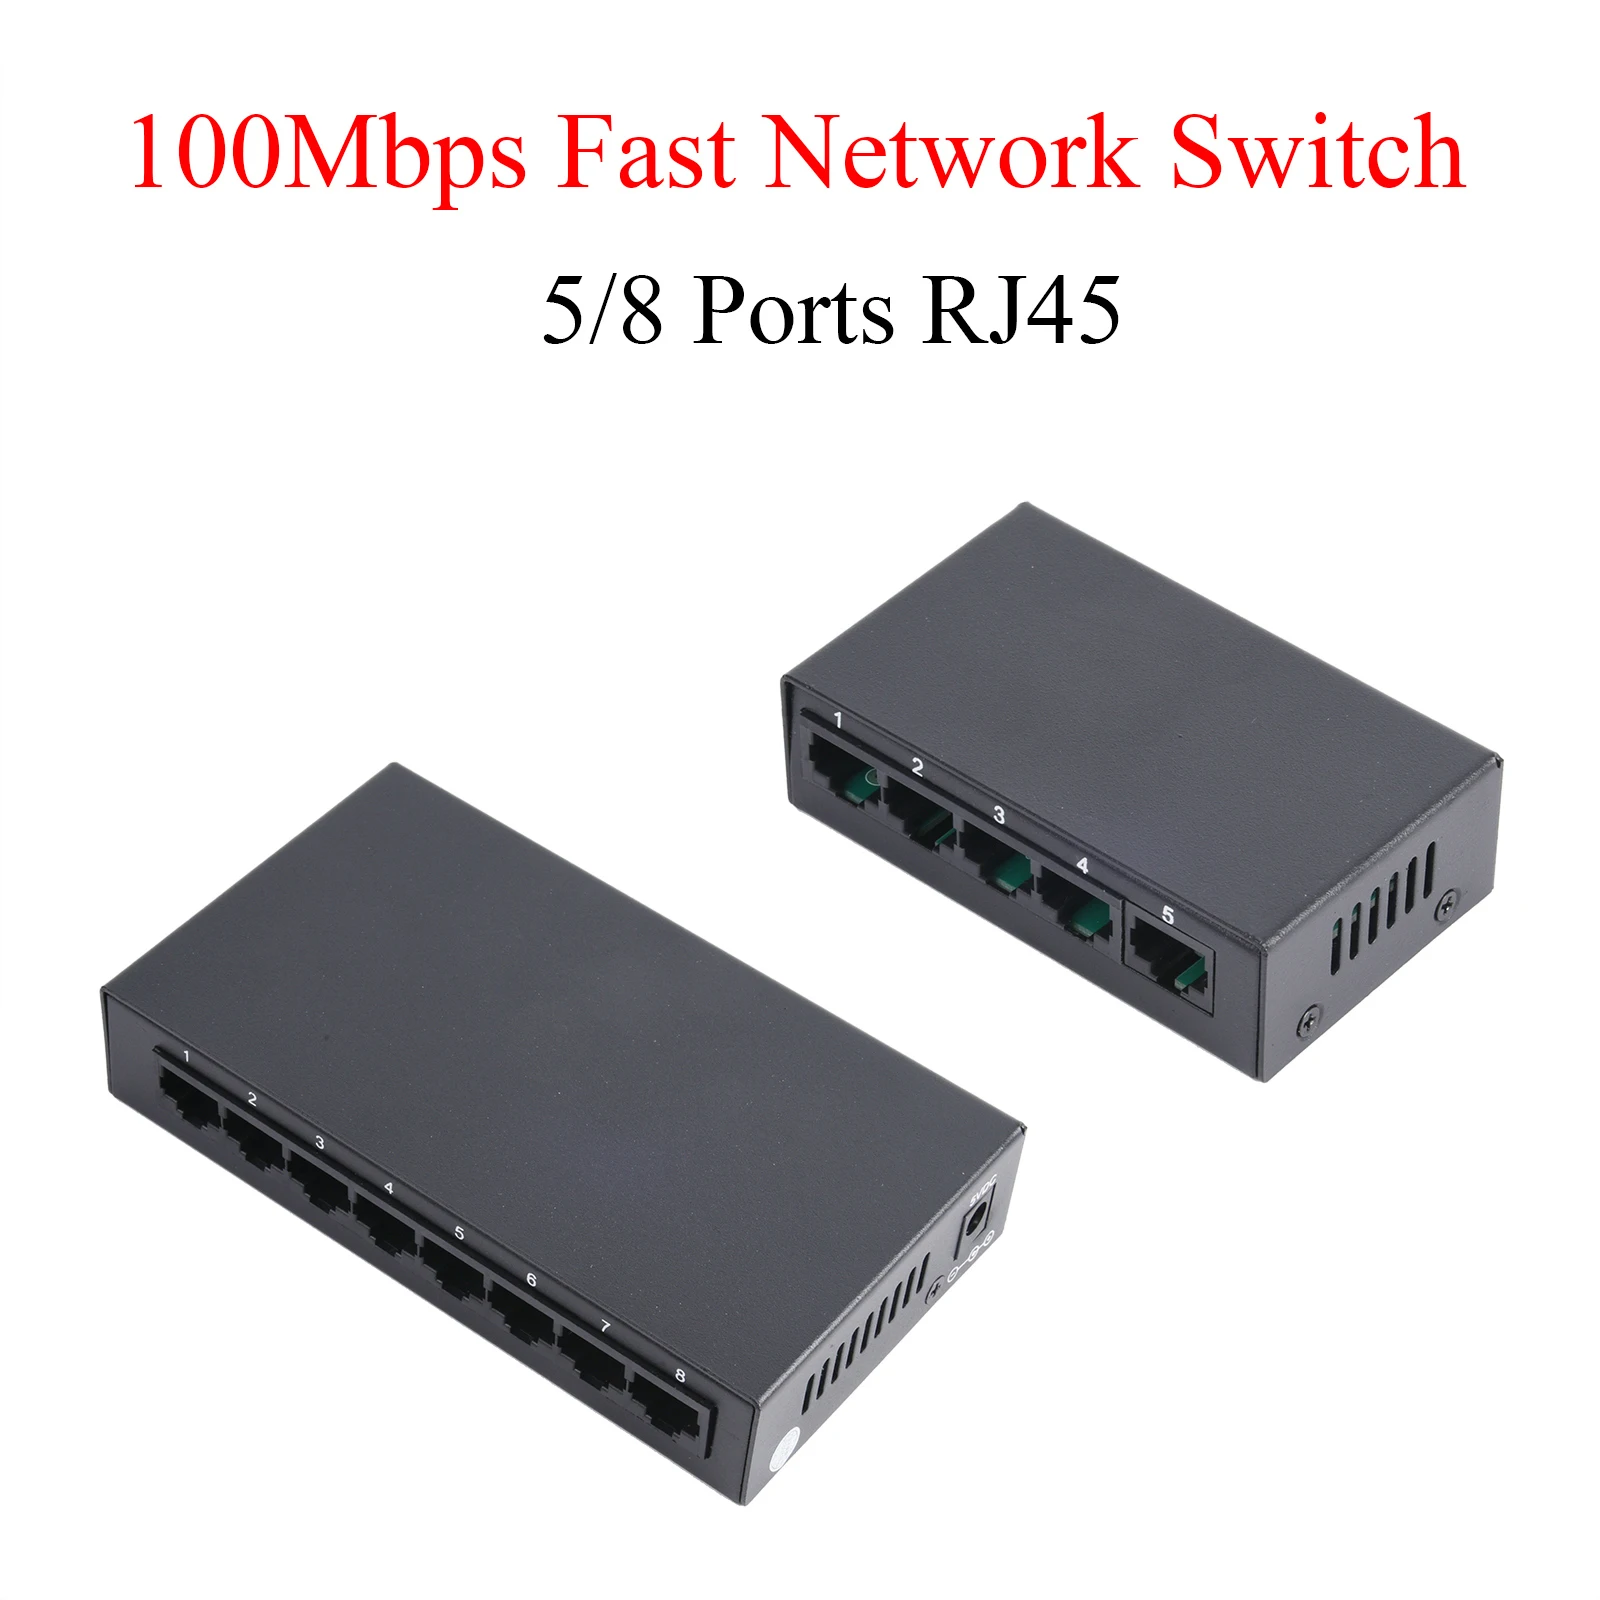 

1PCS 5 Ports/8 Ports 100Mbps RJ45 Fast Network Switch Smart Switcher Hub Metal Shell With US Power Adapter Internet Splitter